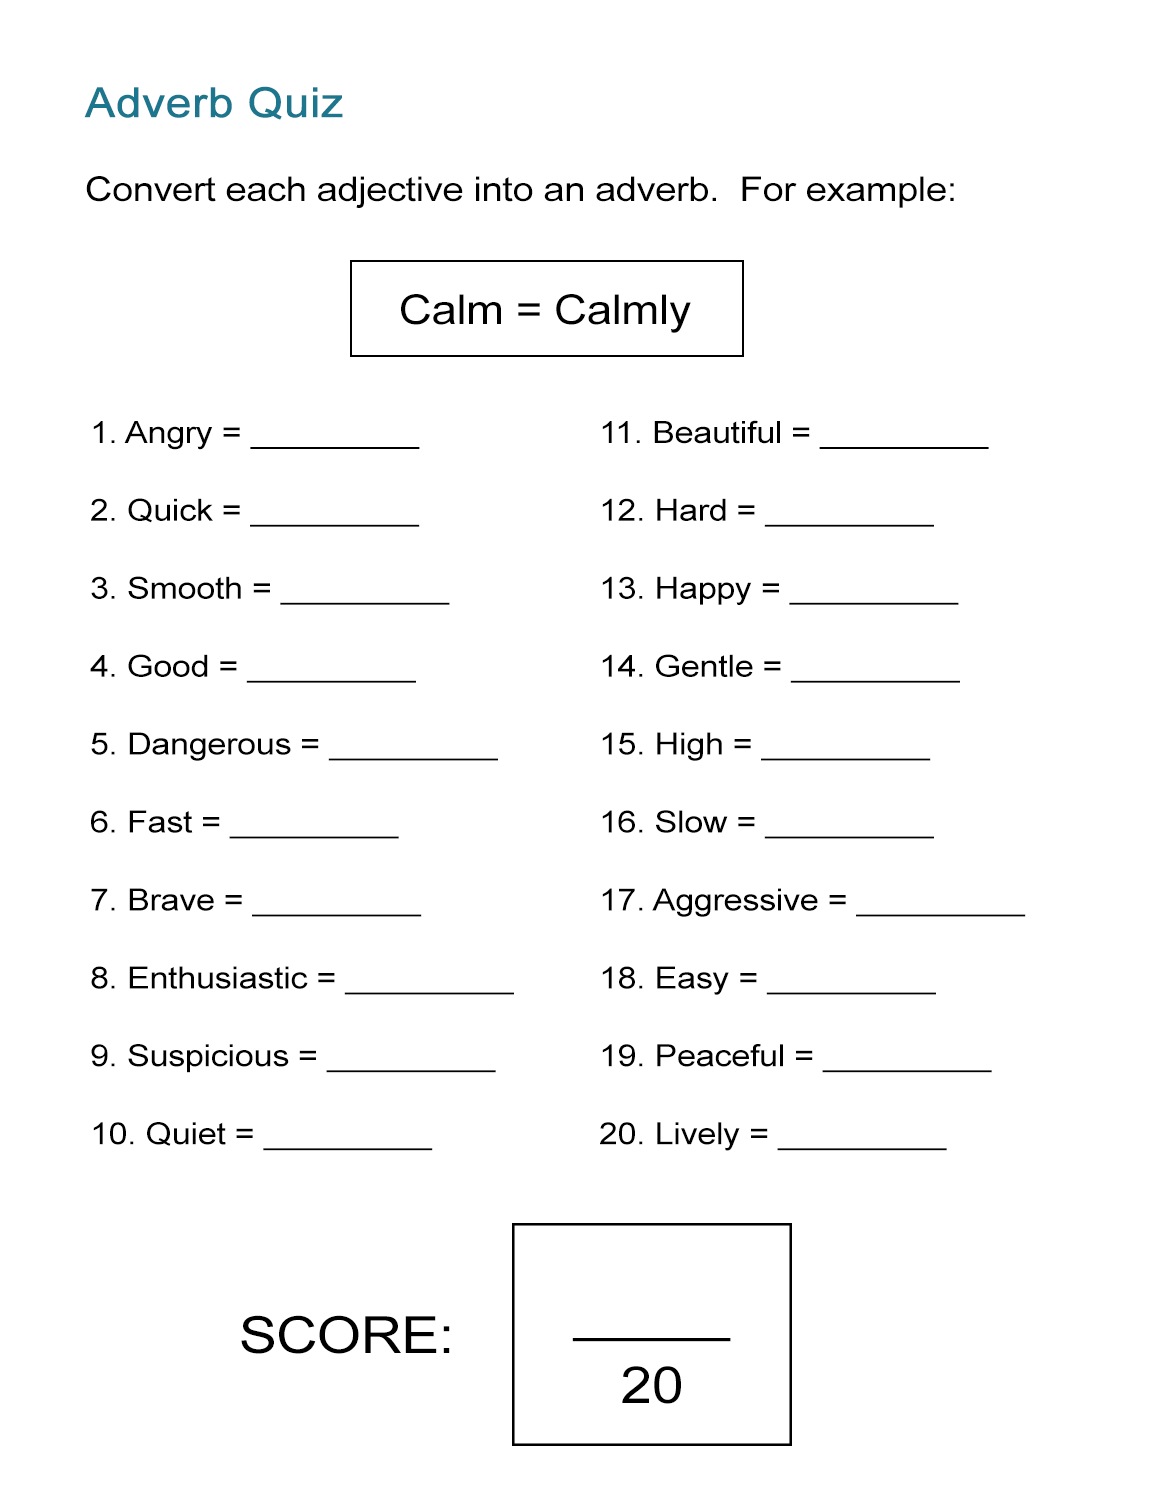 adjectives-worksheets-for-grade-2-in-2021-adverbs-worksheet-adjective-worksheet-adverbs